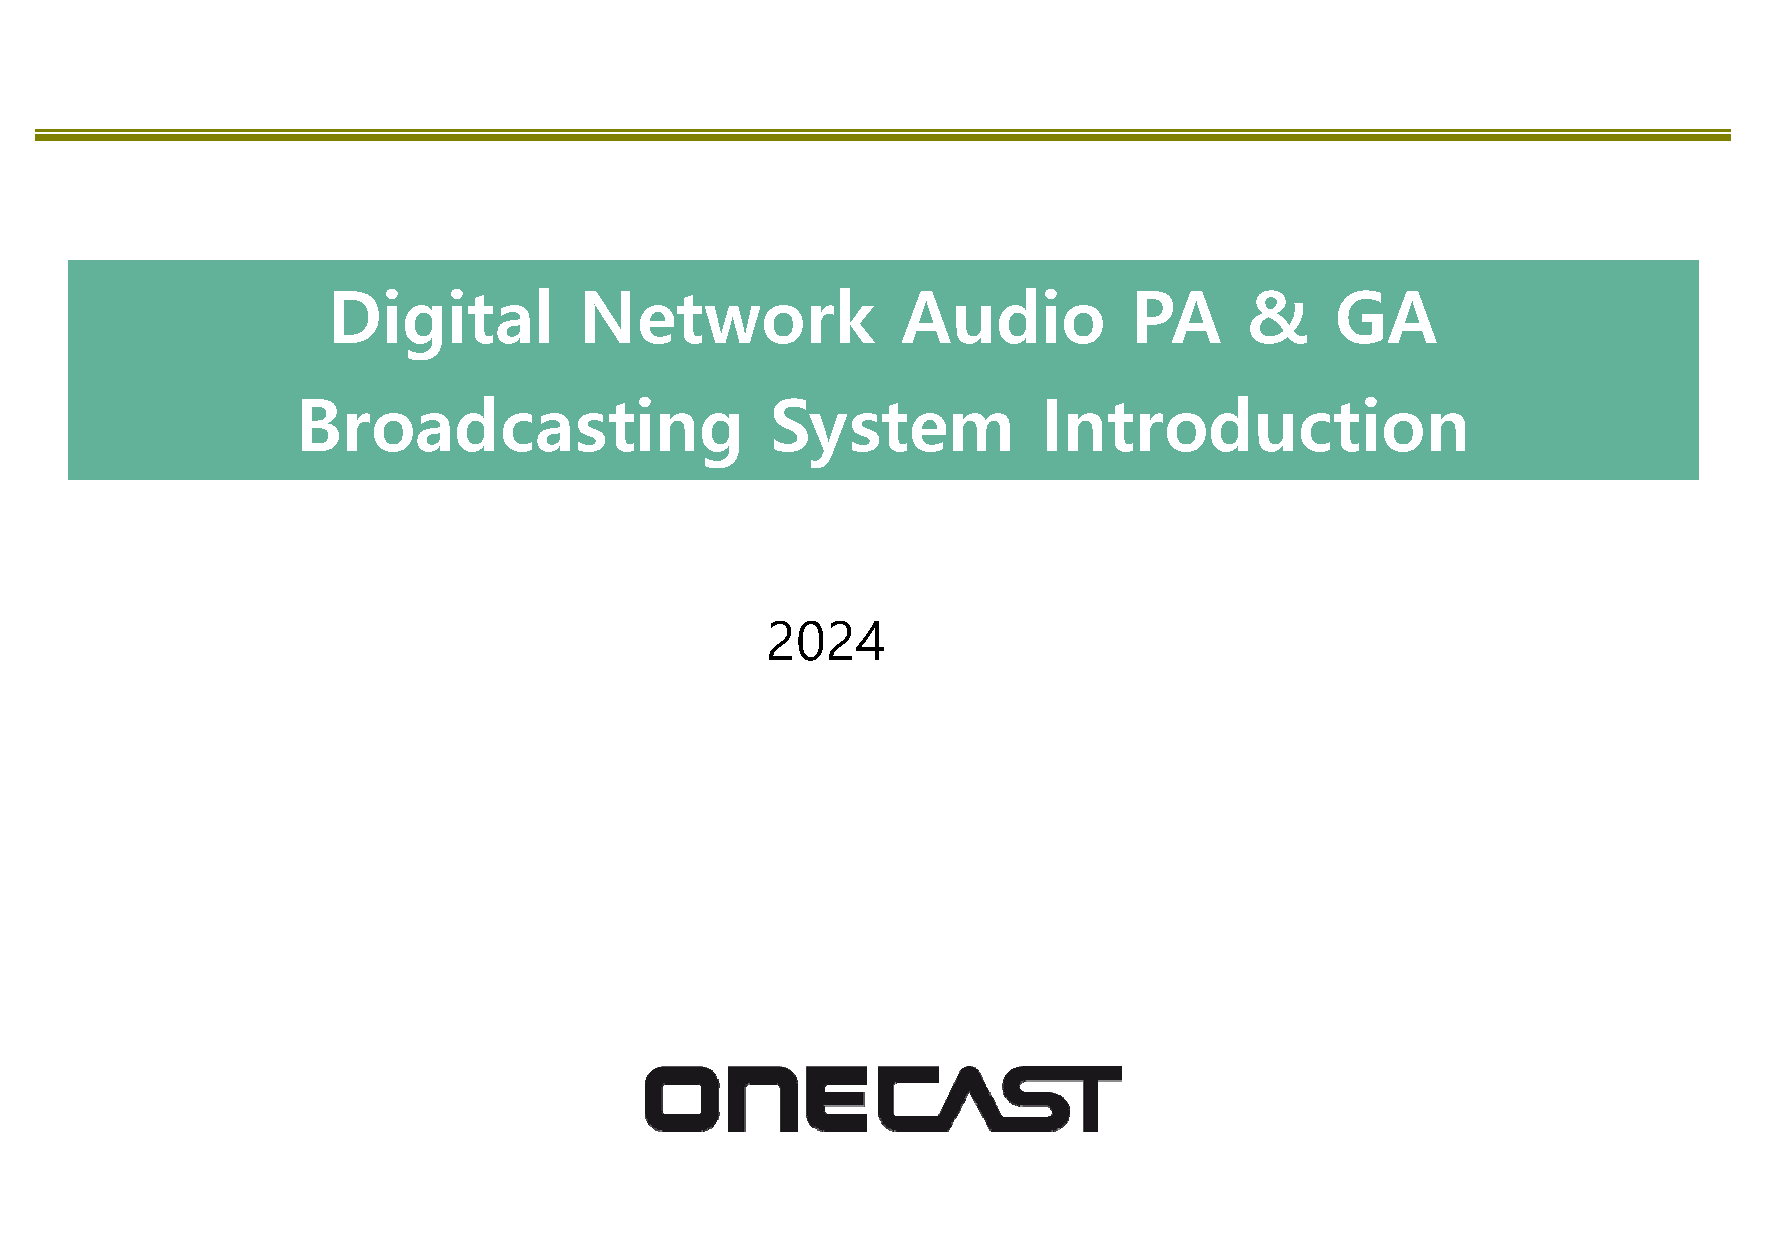 Digital Network Audio PA & GA Broadcasting System Inroduction